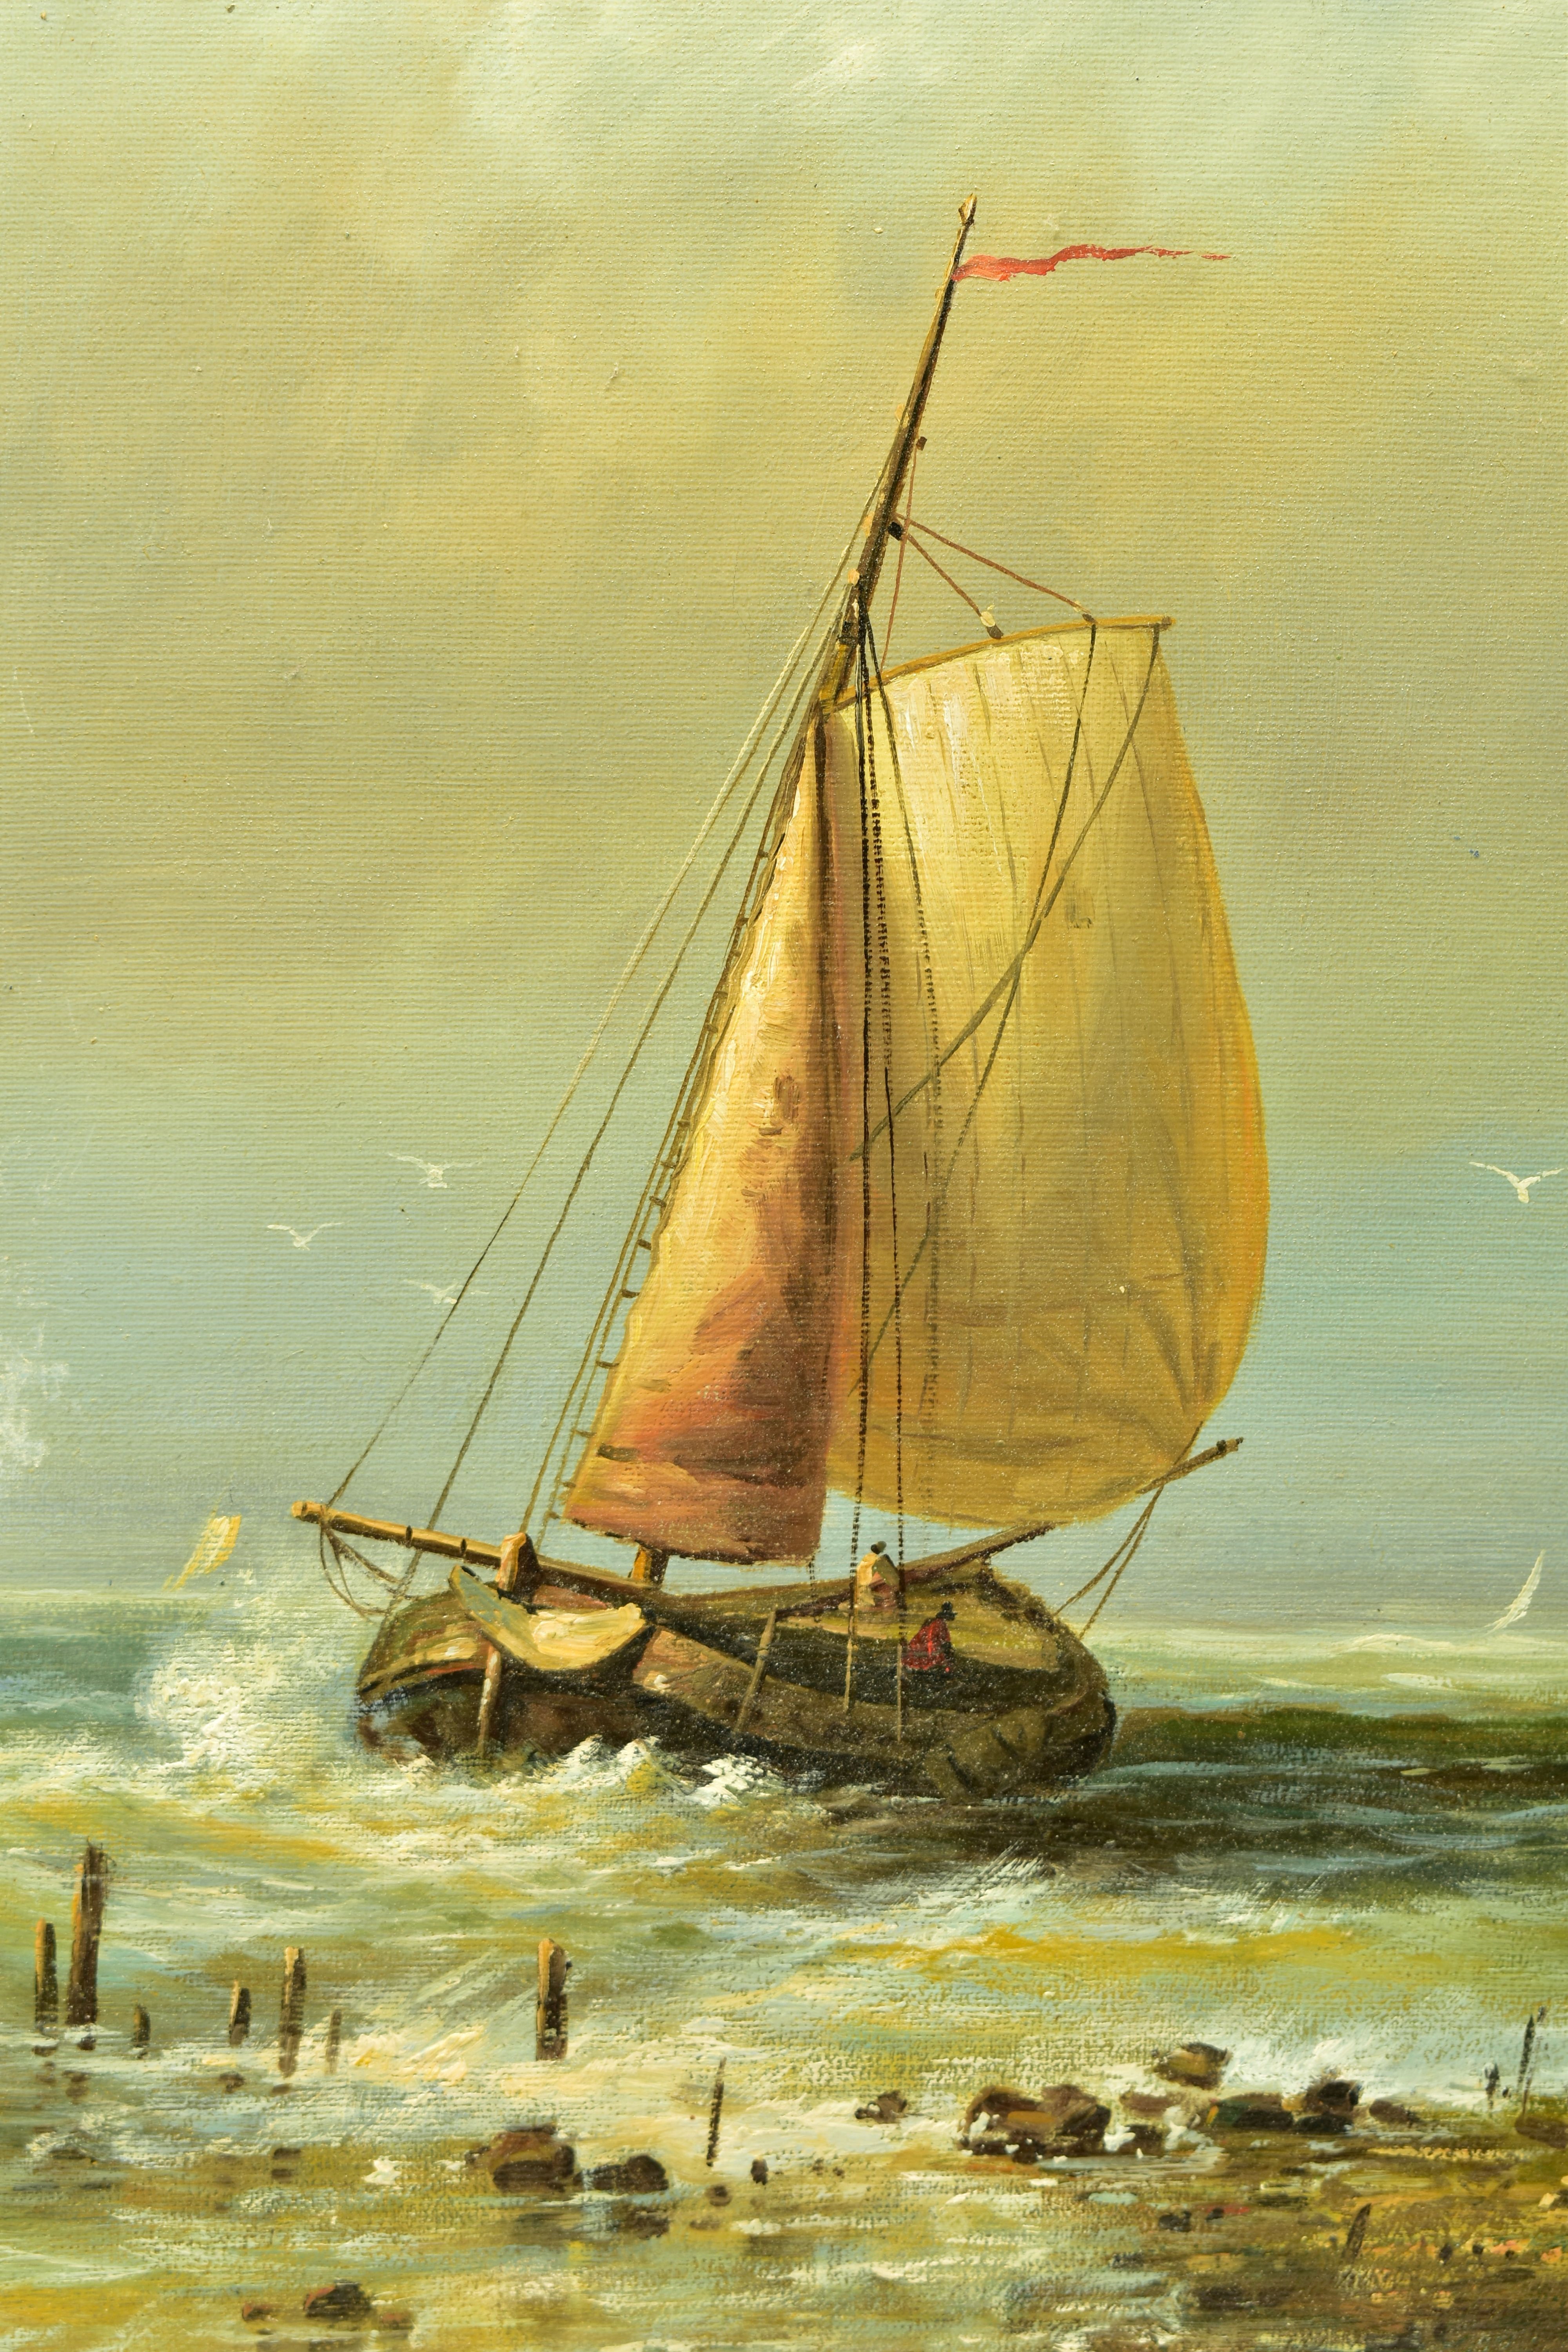 G MURPHY (20TH CENTURY) A NOSTALGIC MARITIME SCENE PAINTED IN A 19TH CENTURY STYLE, depicting - Image 4 of 7